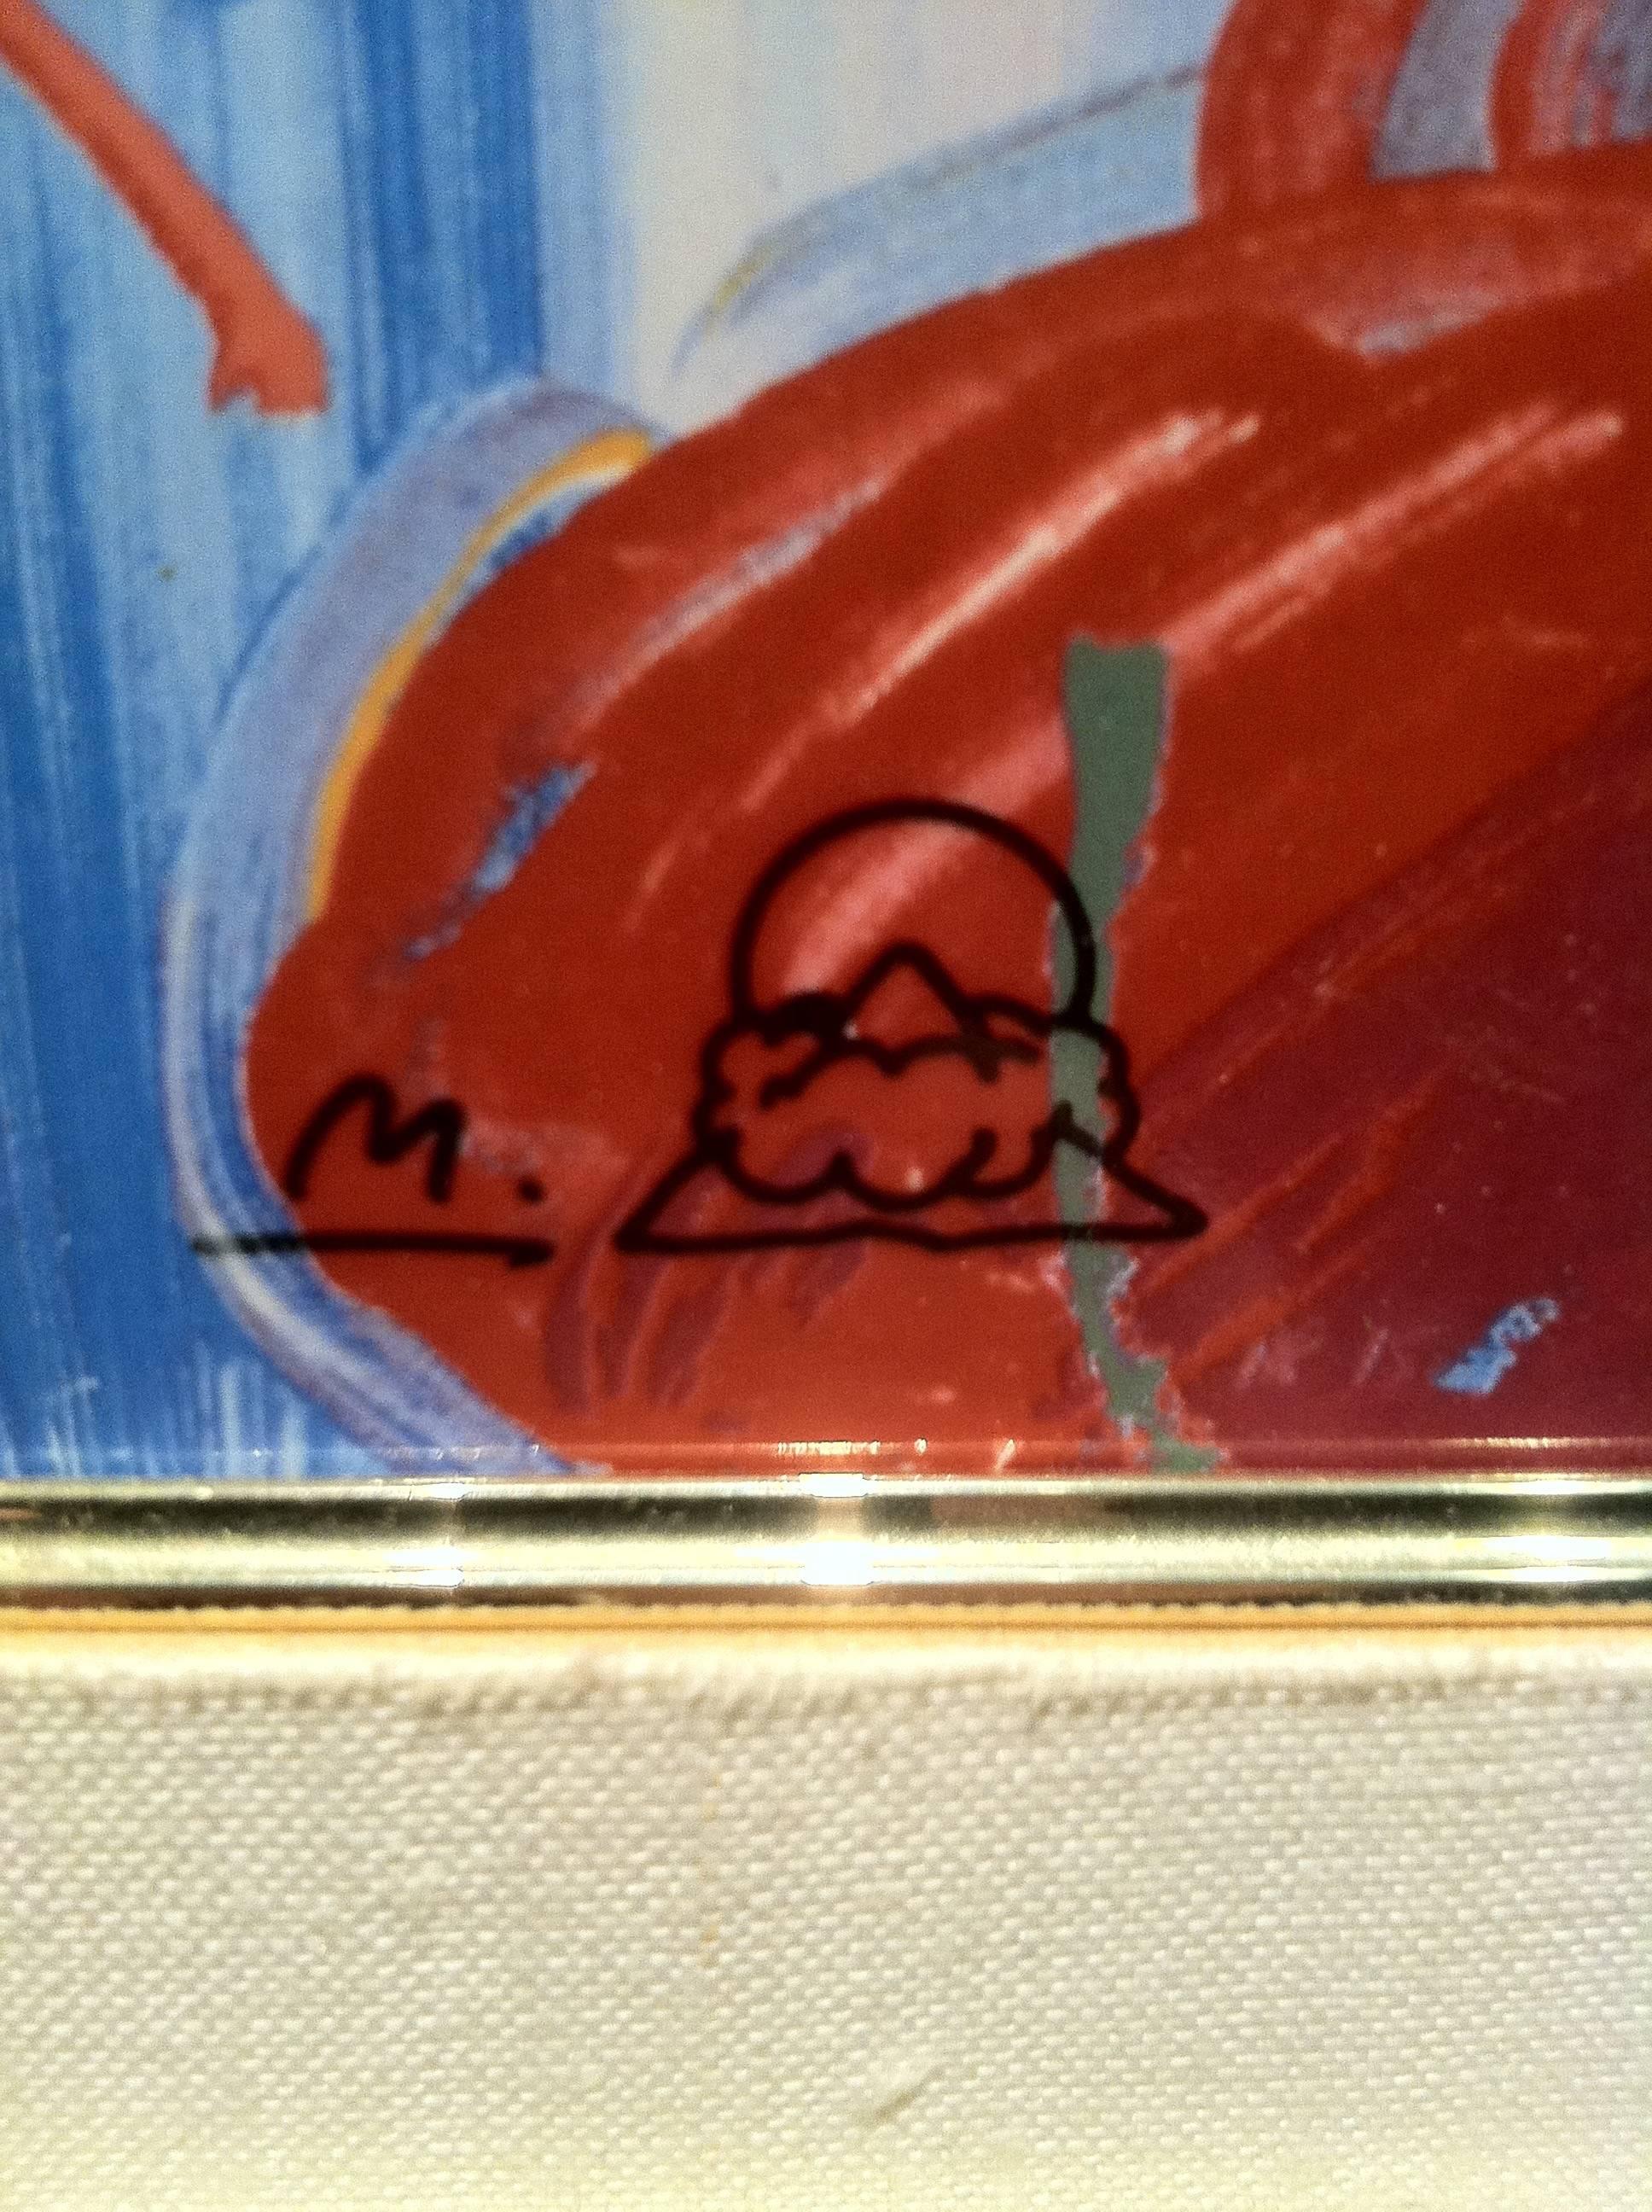 A ceramic image by renowned artist Peter Max. The painting in acrylics has a certificate of authenticity on the back and is signed by the artist on the front.